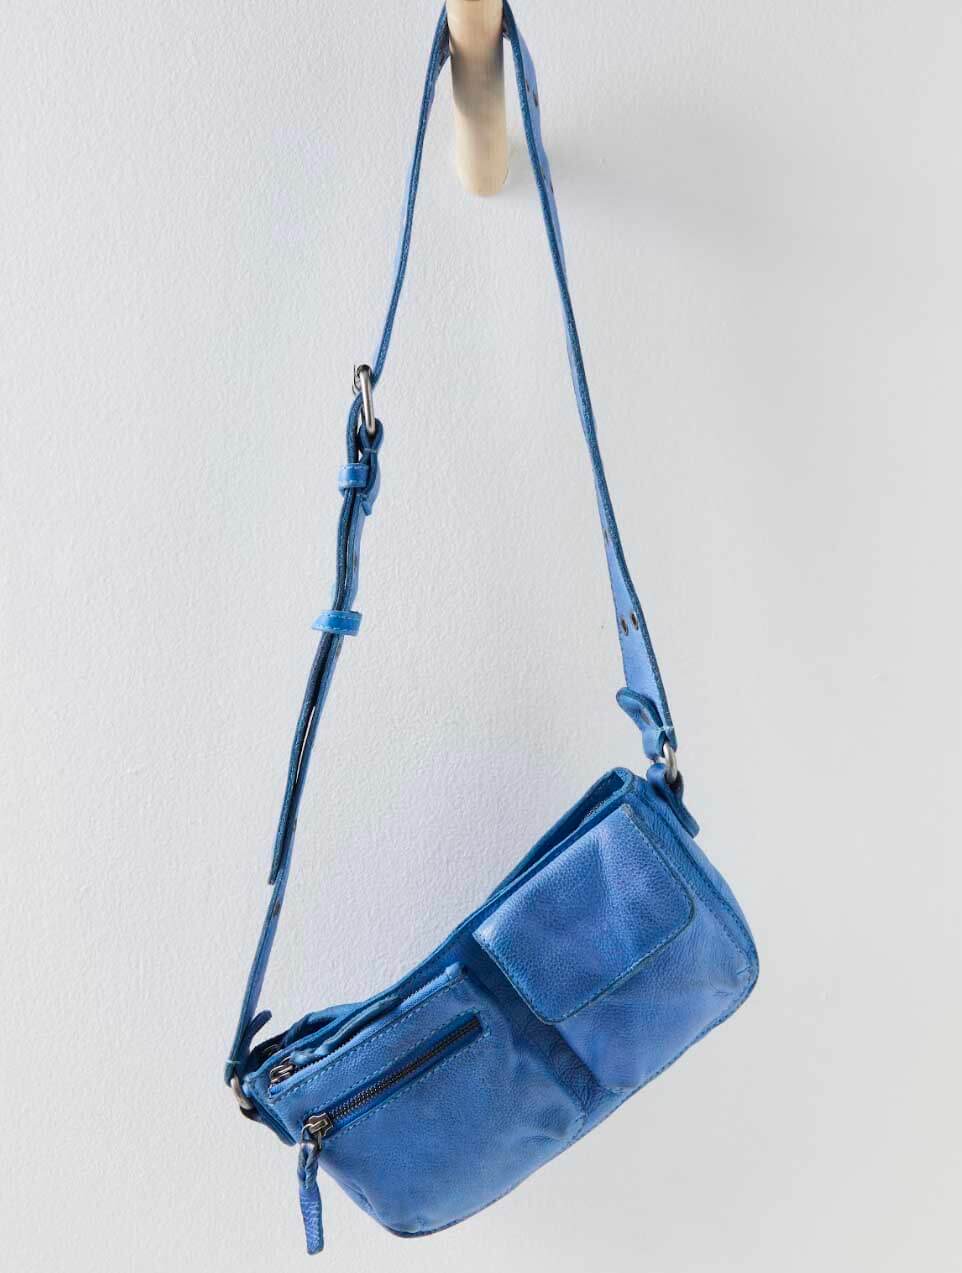 Free People Wade Leather Sling Bag in Iridescent Blue